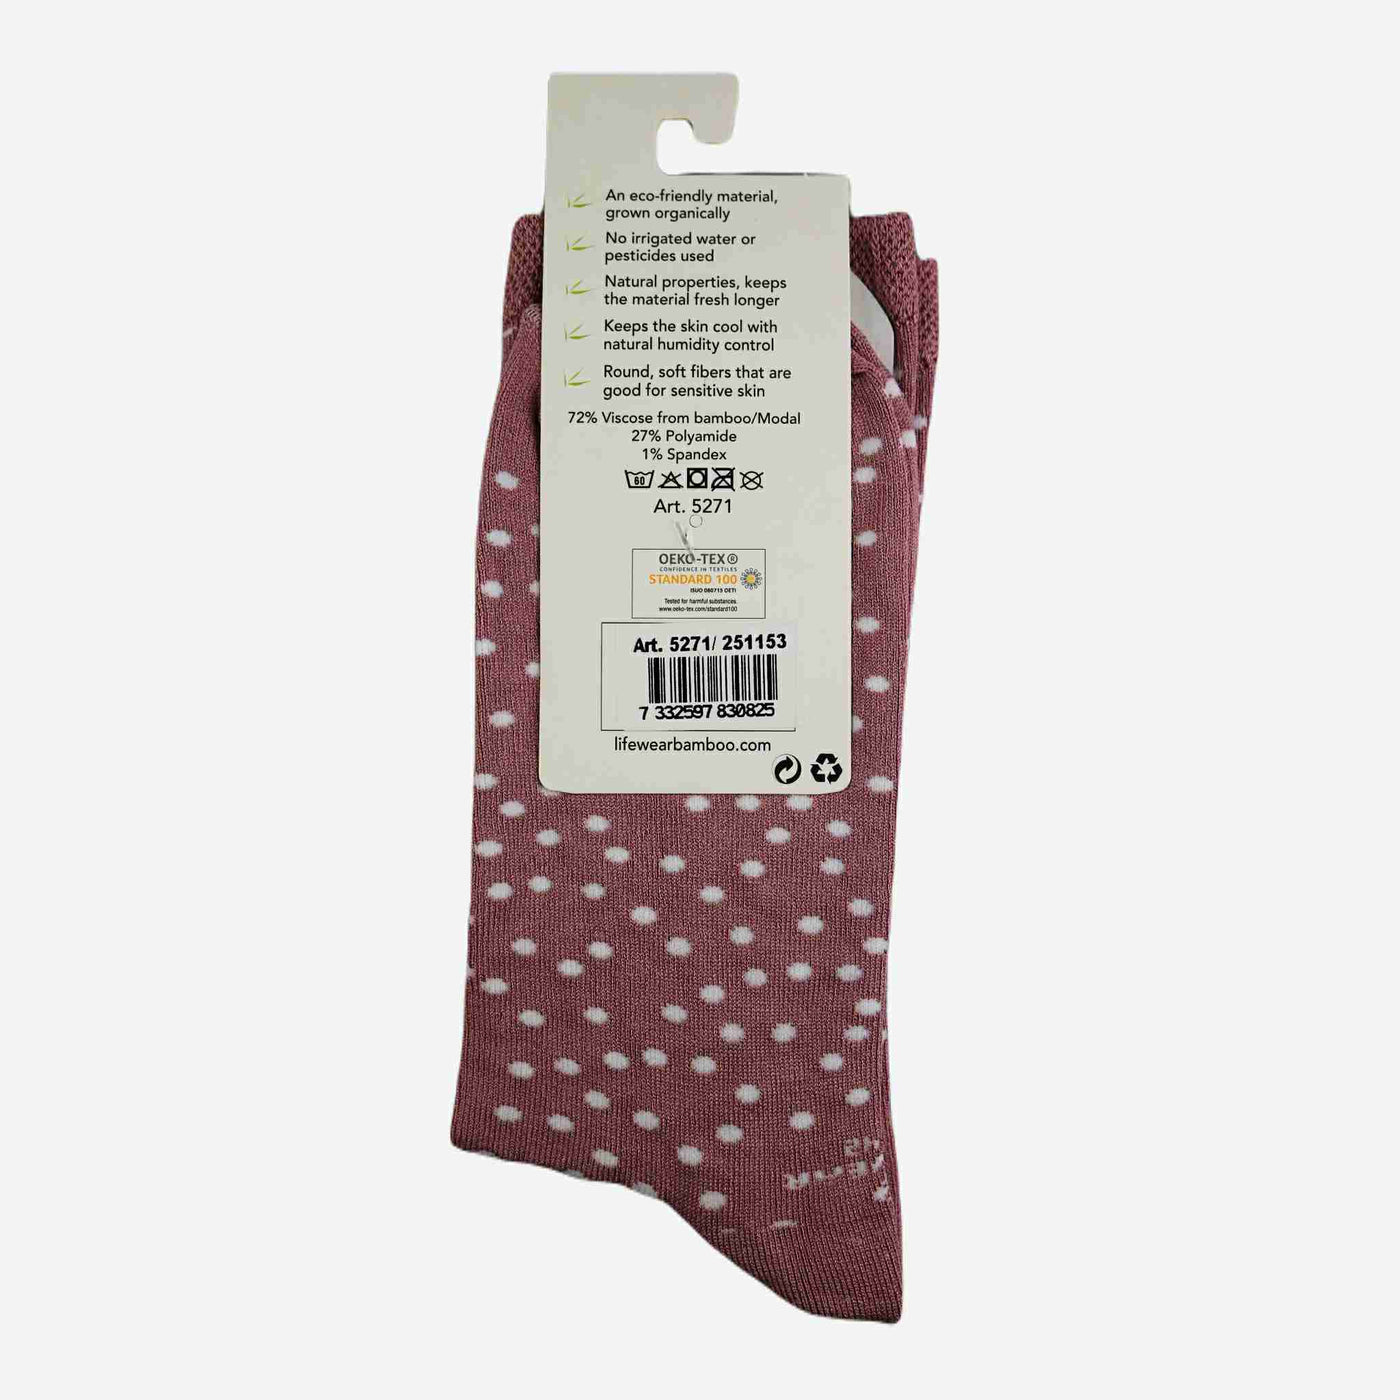 Womens pink bamboo socks with white dots